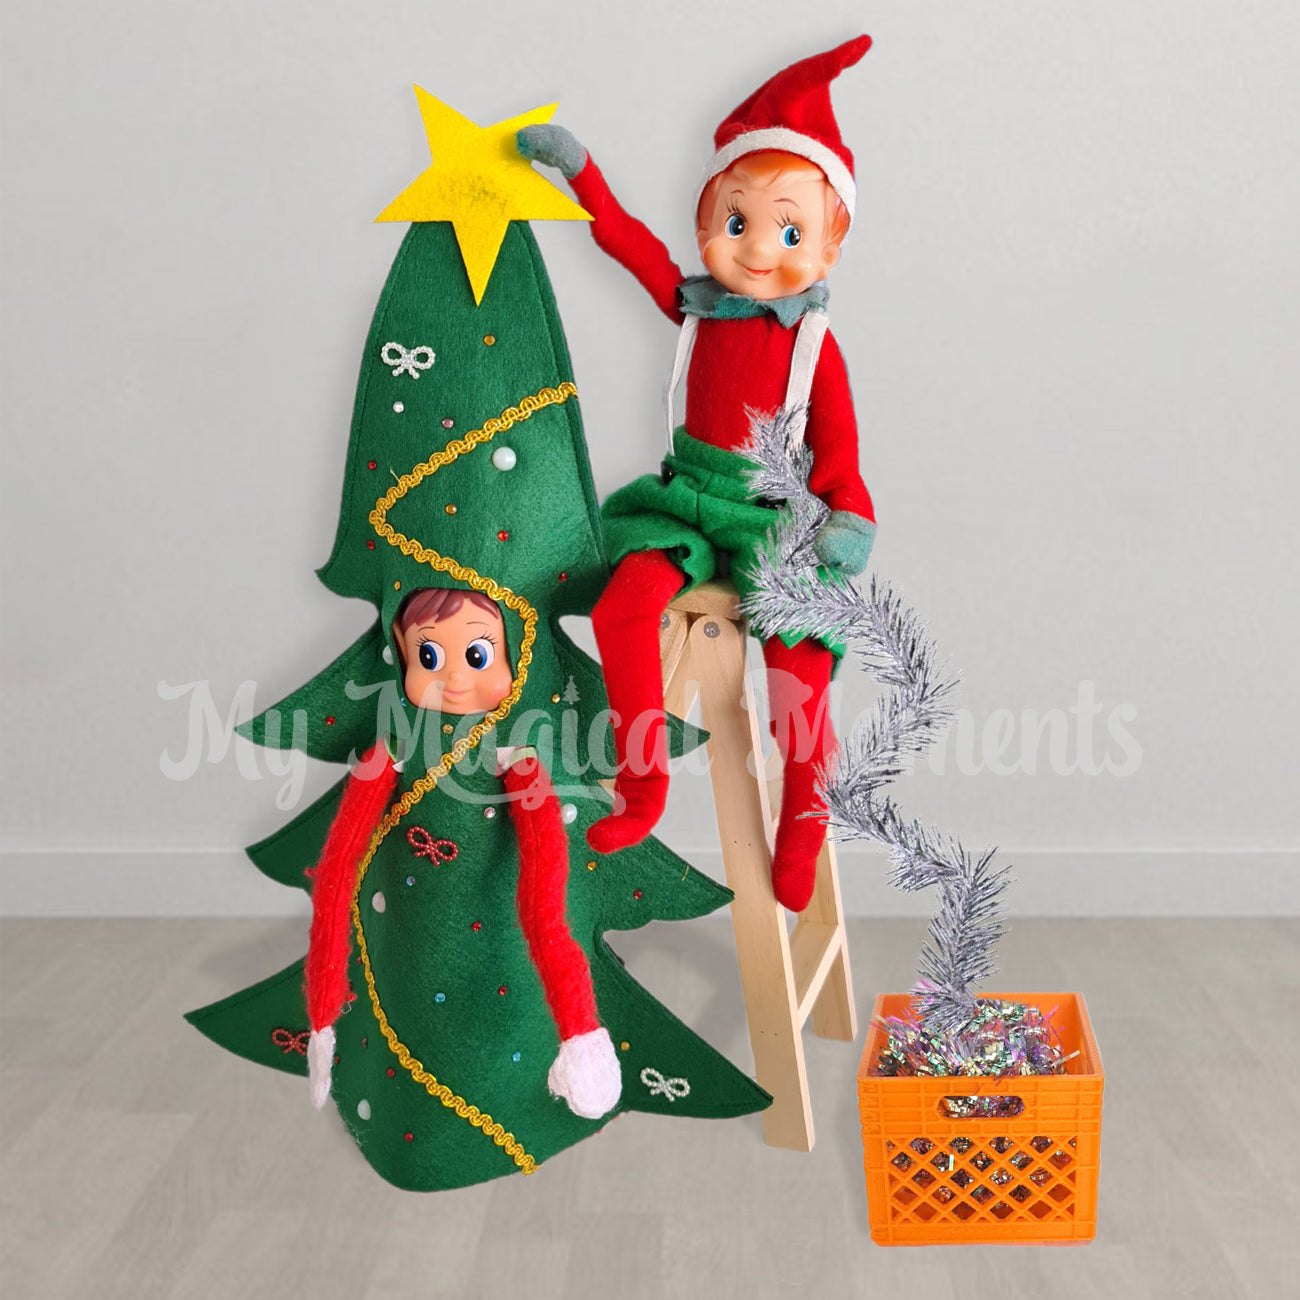 An elf sitting on a ladder decorating another elf dressed as a Christmas tree with a miniature crate full of decorations